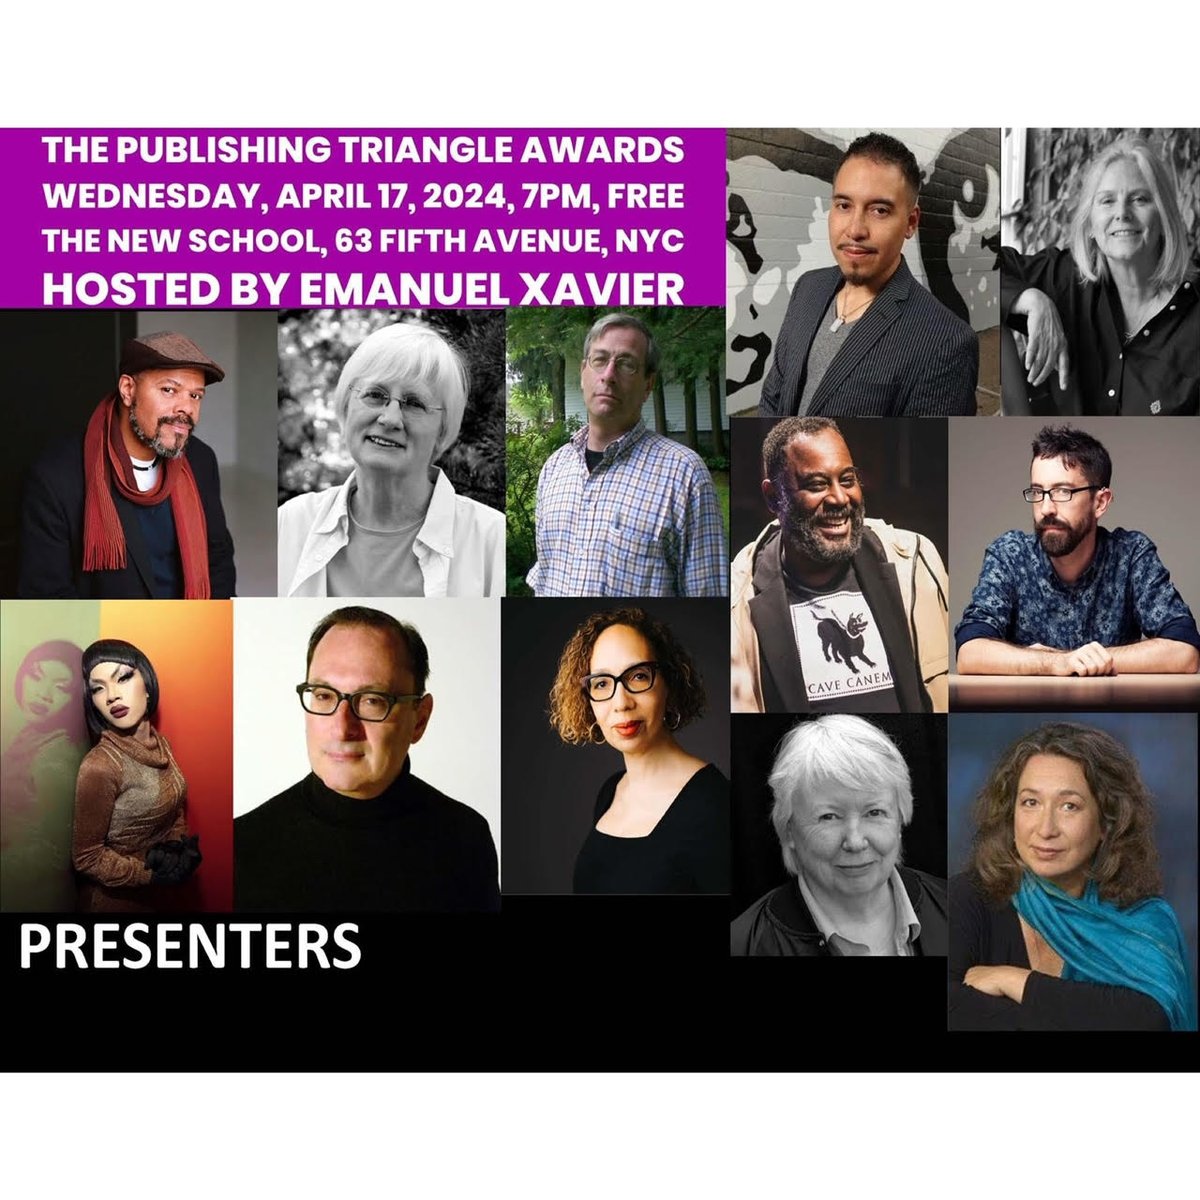 (1/3) Join us- April 17 @ 7pm at The New School (63 Fifth Ave off 13th St, UC Auditorium)! Our 36th annual Publishing Triangle Awards is FREE, hosted by poet & activist Emanuel Xavier. Come early to take pics with our brand new PT banner! 🏳️‍🌈✨ #ptawards2024